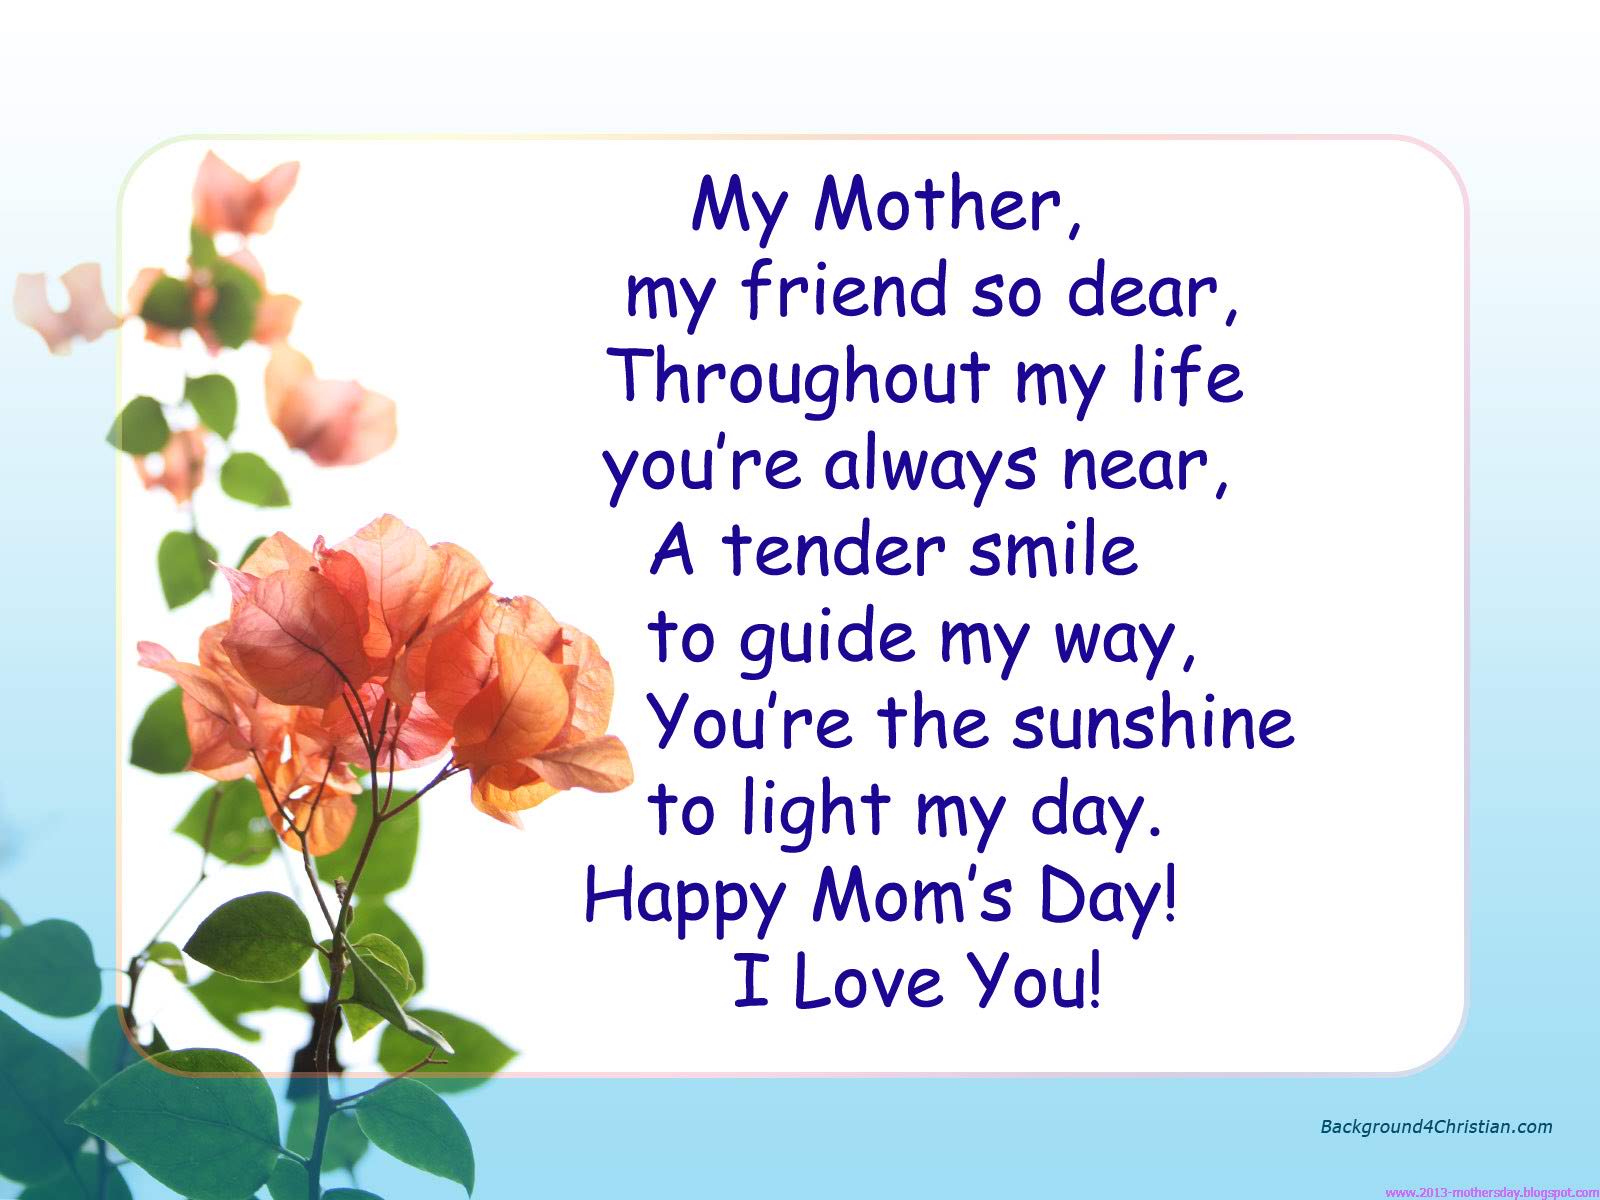 Happy Mothers Day Quotes - Happy Mothers Day Quotes Wishes - HD Wallpaper 